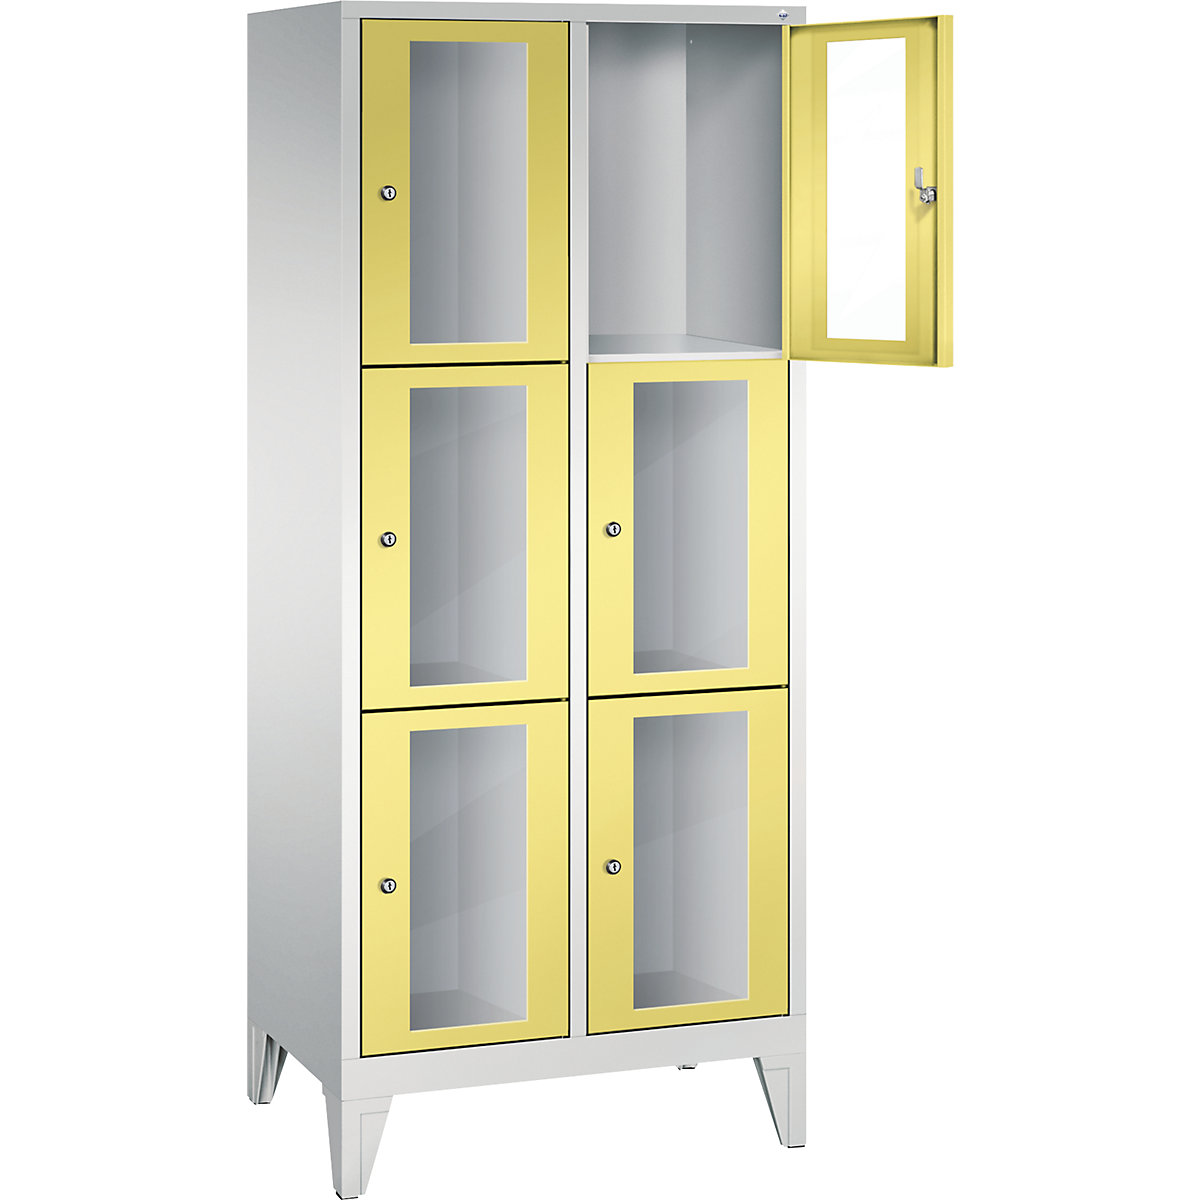 C+P – CLASSIC locker unit, compartment height 510 mm, with feet, 6 compartments, width 810 mm, sulphur yellow door